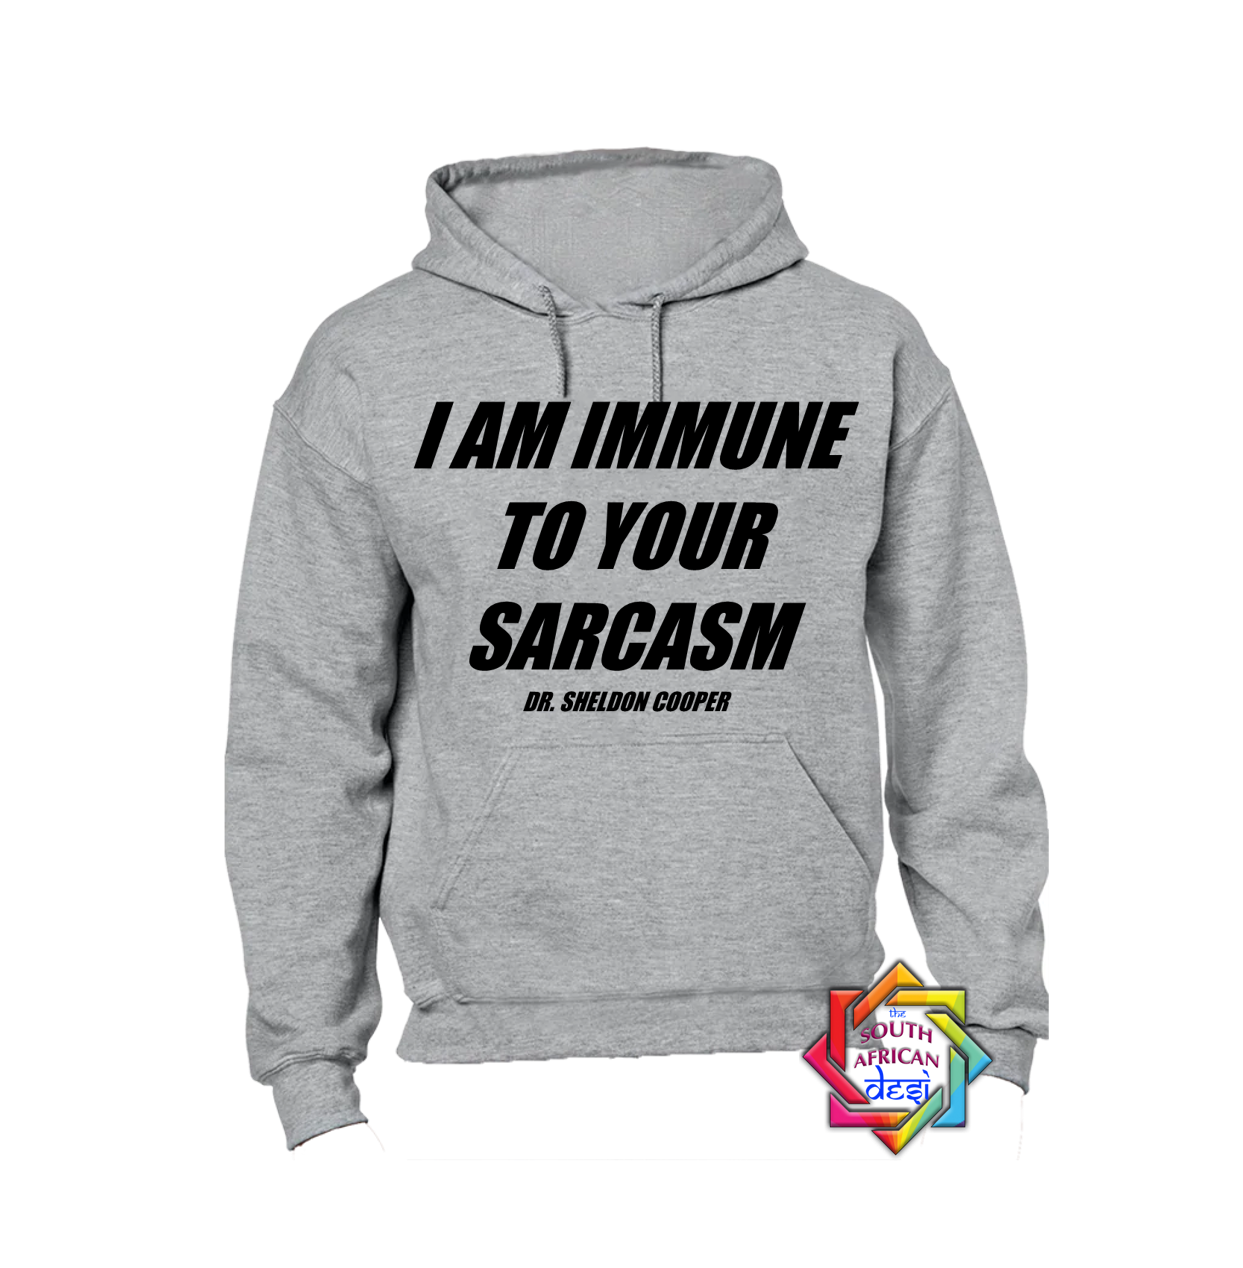 I AM IMMUNE TO YOUR SARCASM - DR SHELDON COOPER | BIG BANG THEORY INSPIRED HOODIE/SWEATER | UNISEX